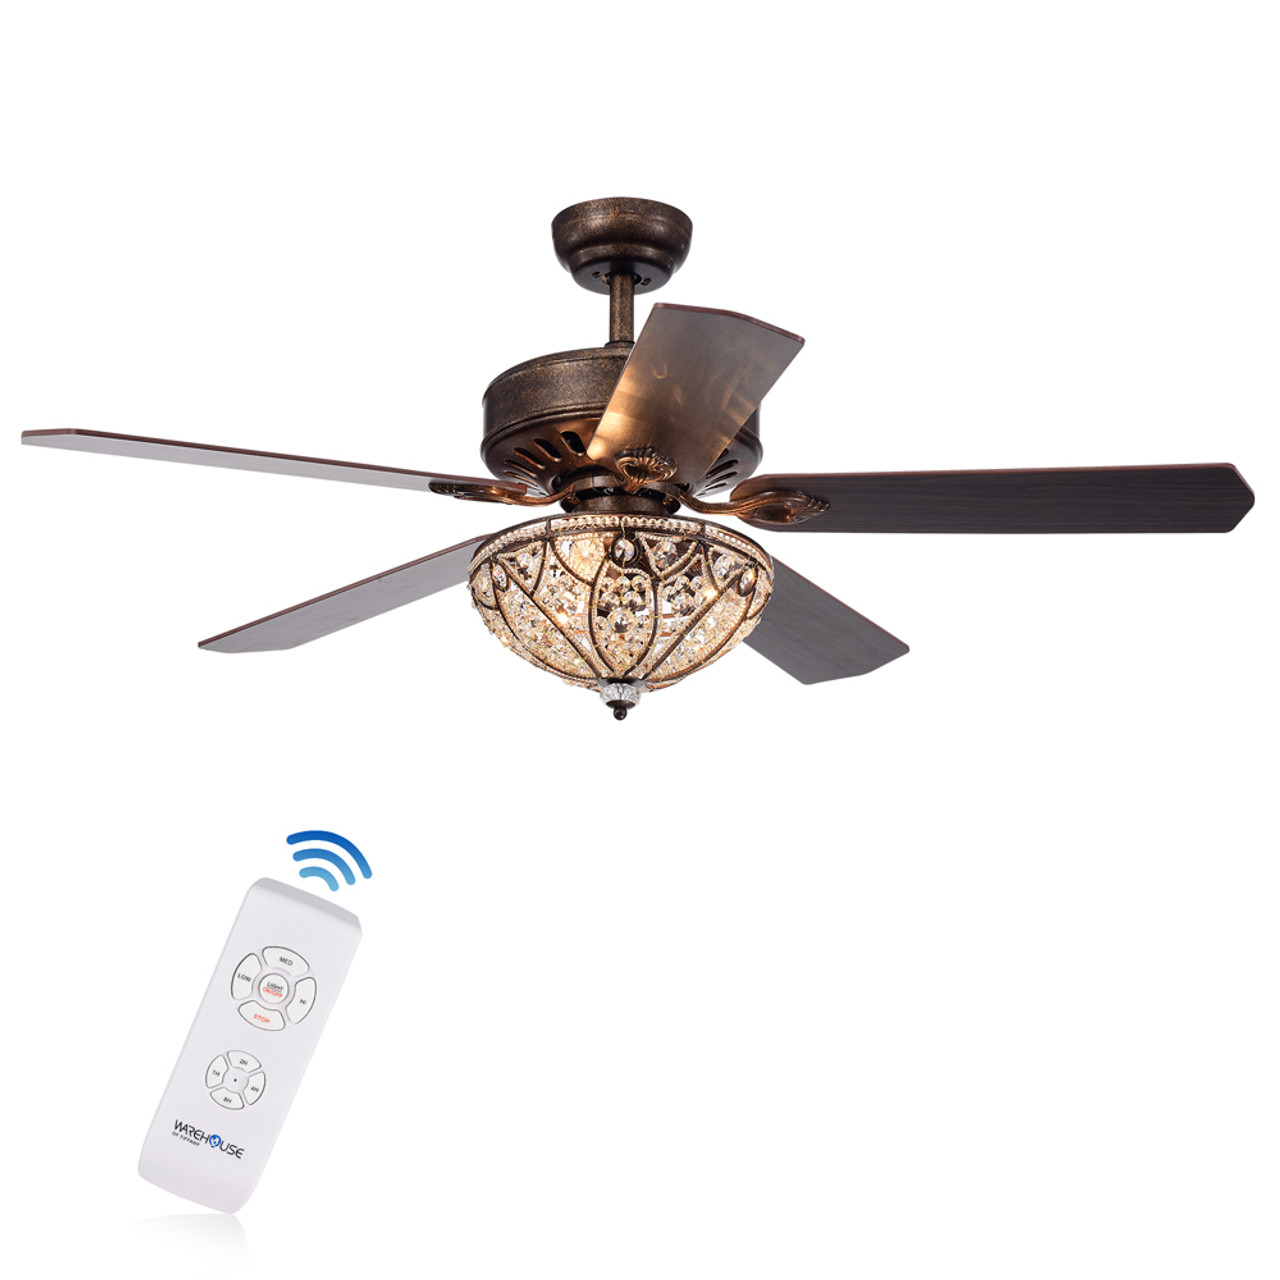 WAREHOUSE OF TIFFANY'S CFL-8353REMO/RB Gliska 20.12 in. 3-Light Indoor Bronze Finish Remote Controlled Ceiling Fan with Light Kit